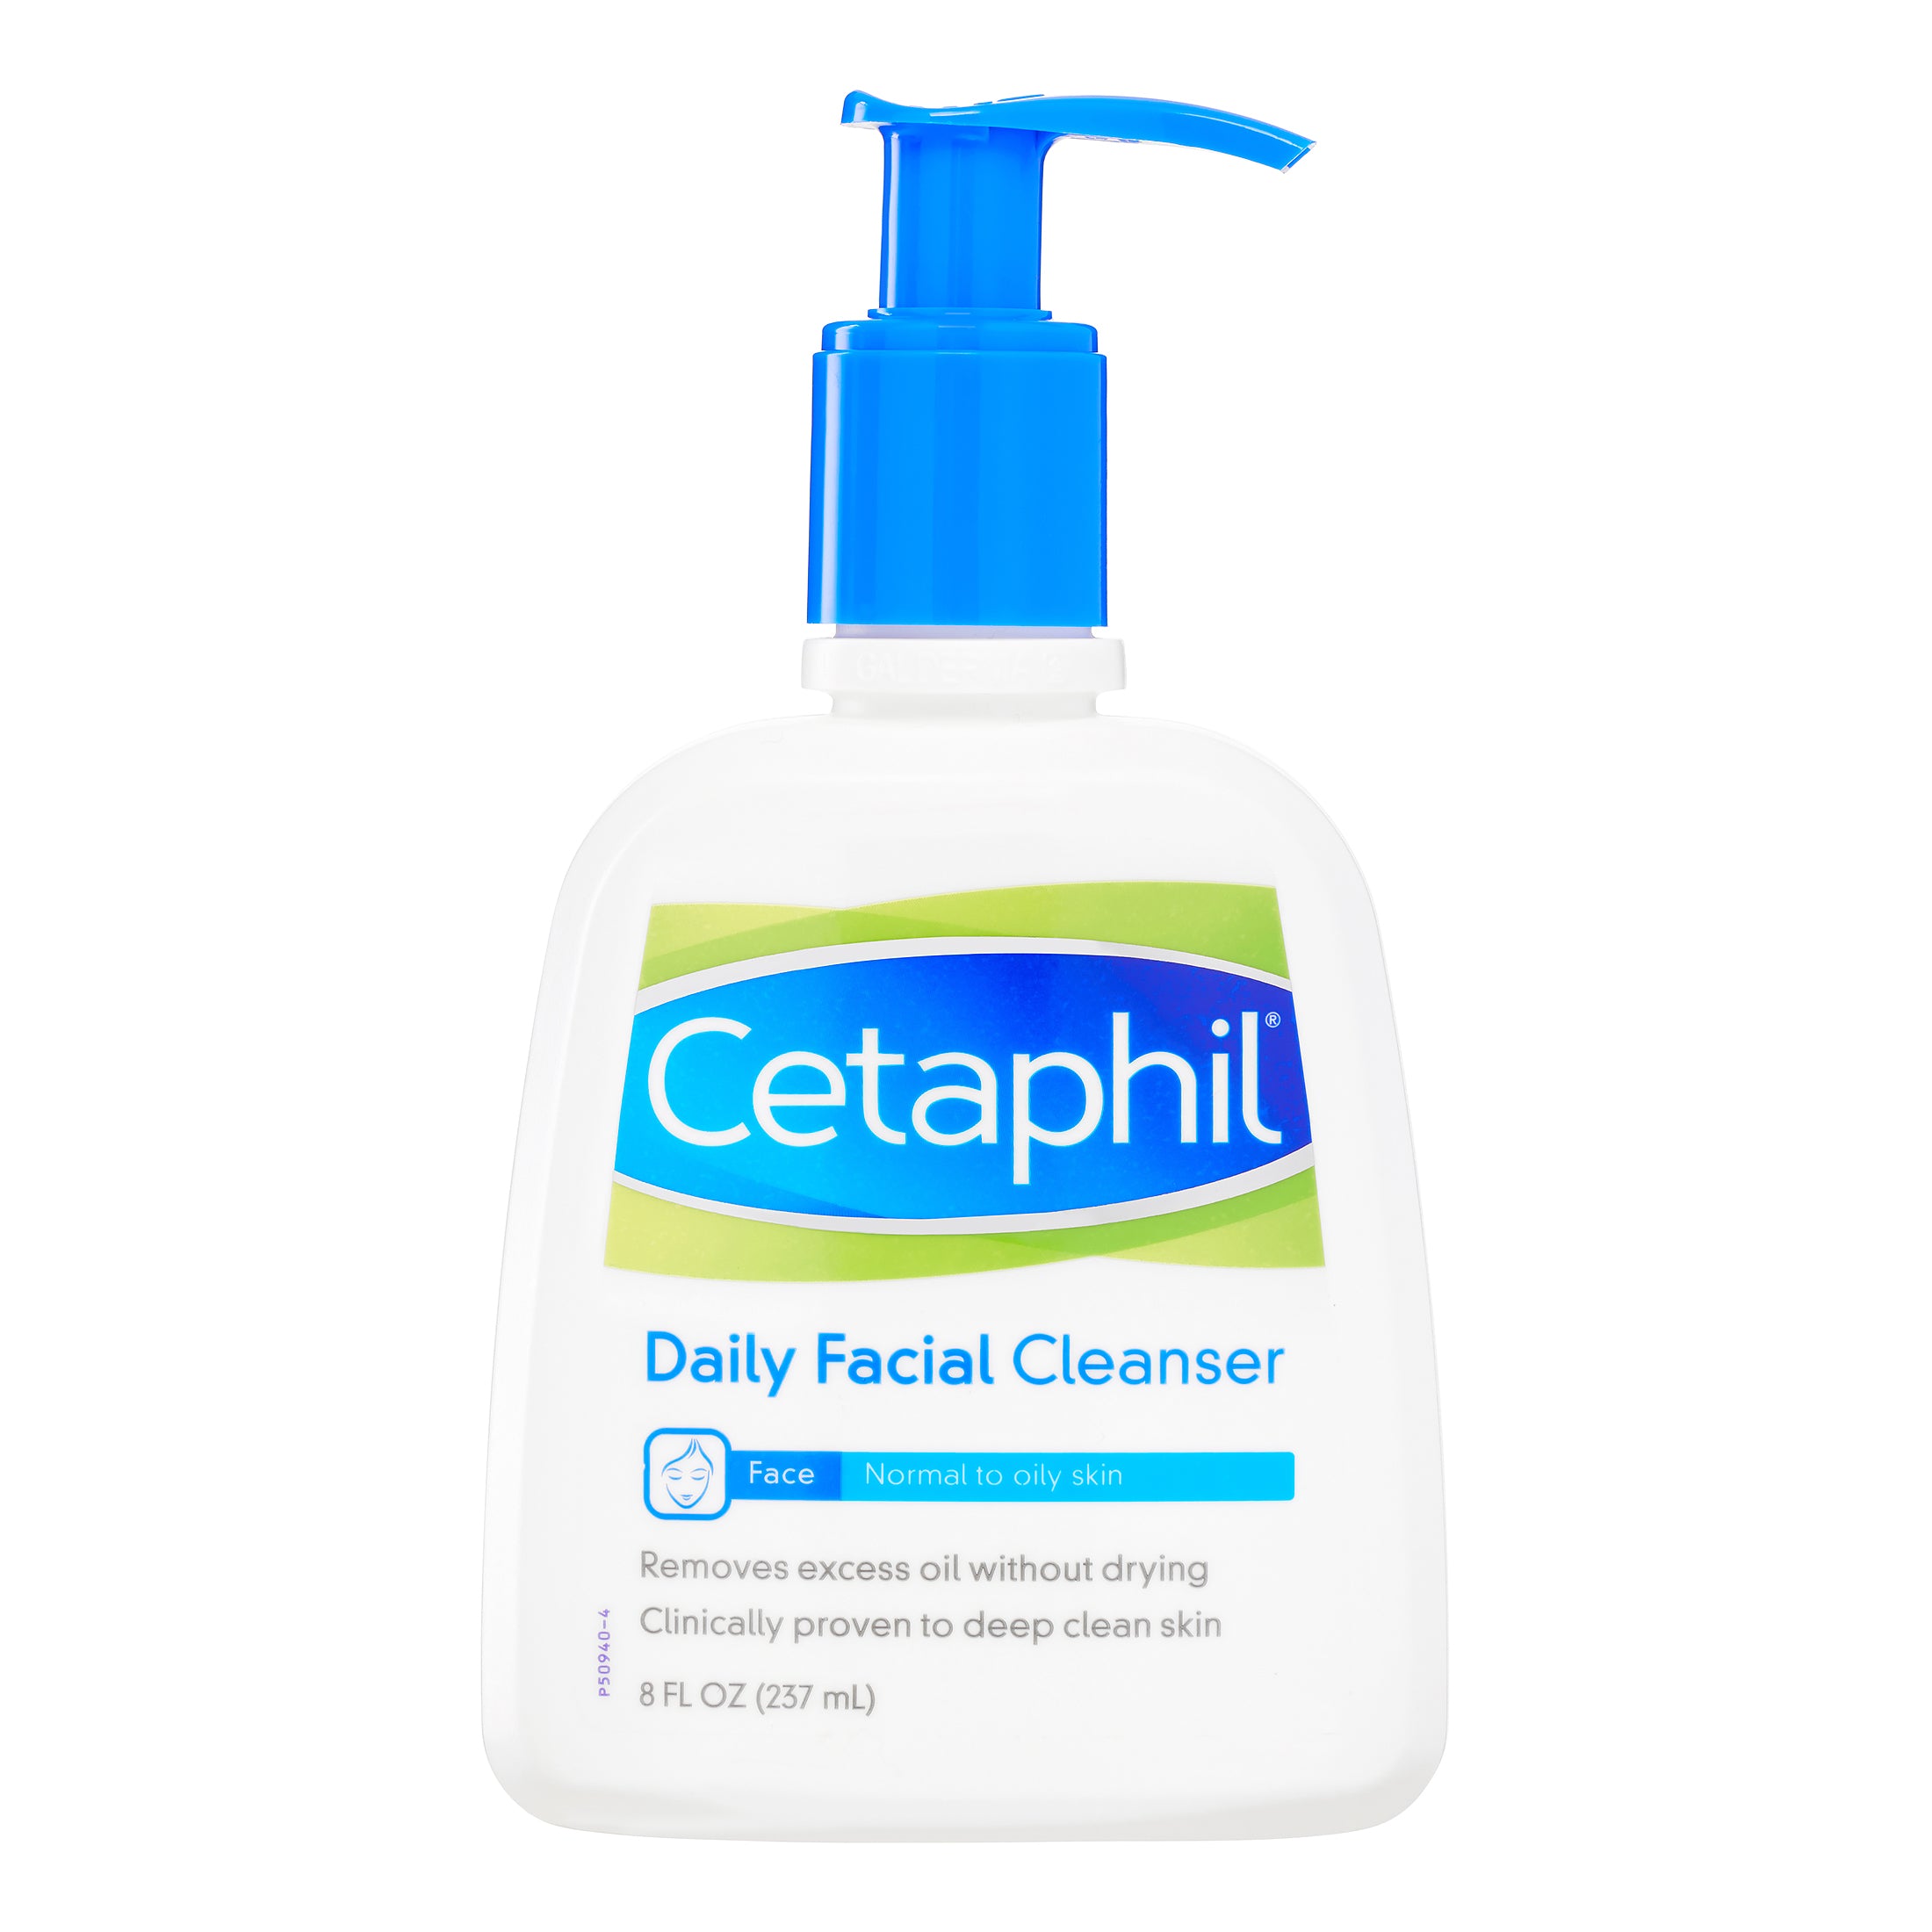 Cetaphil Daily Facial Cleanser, Face Wash For Normal to Oily Skin, 8 Oz